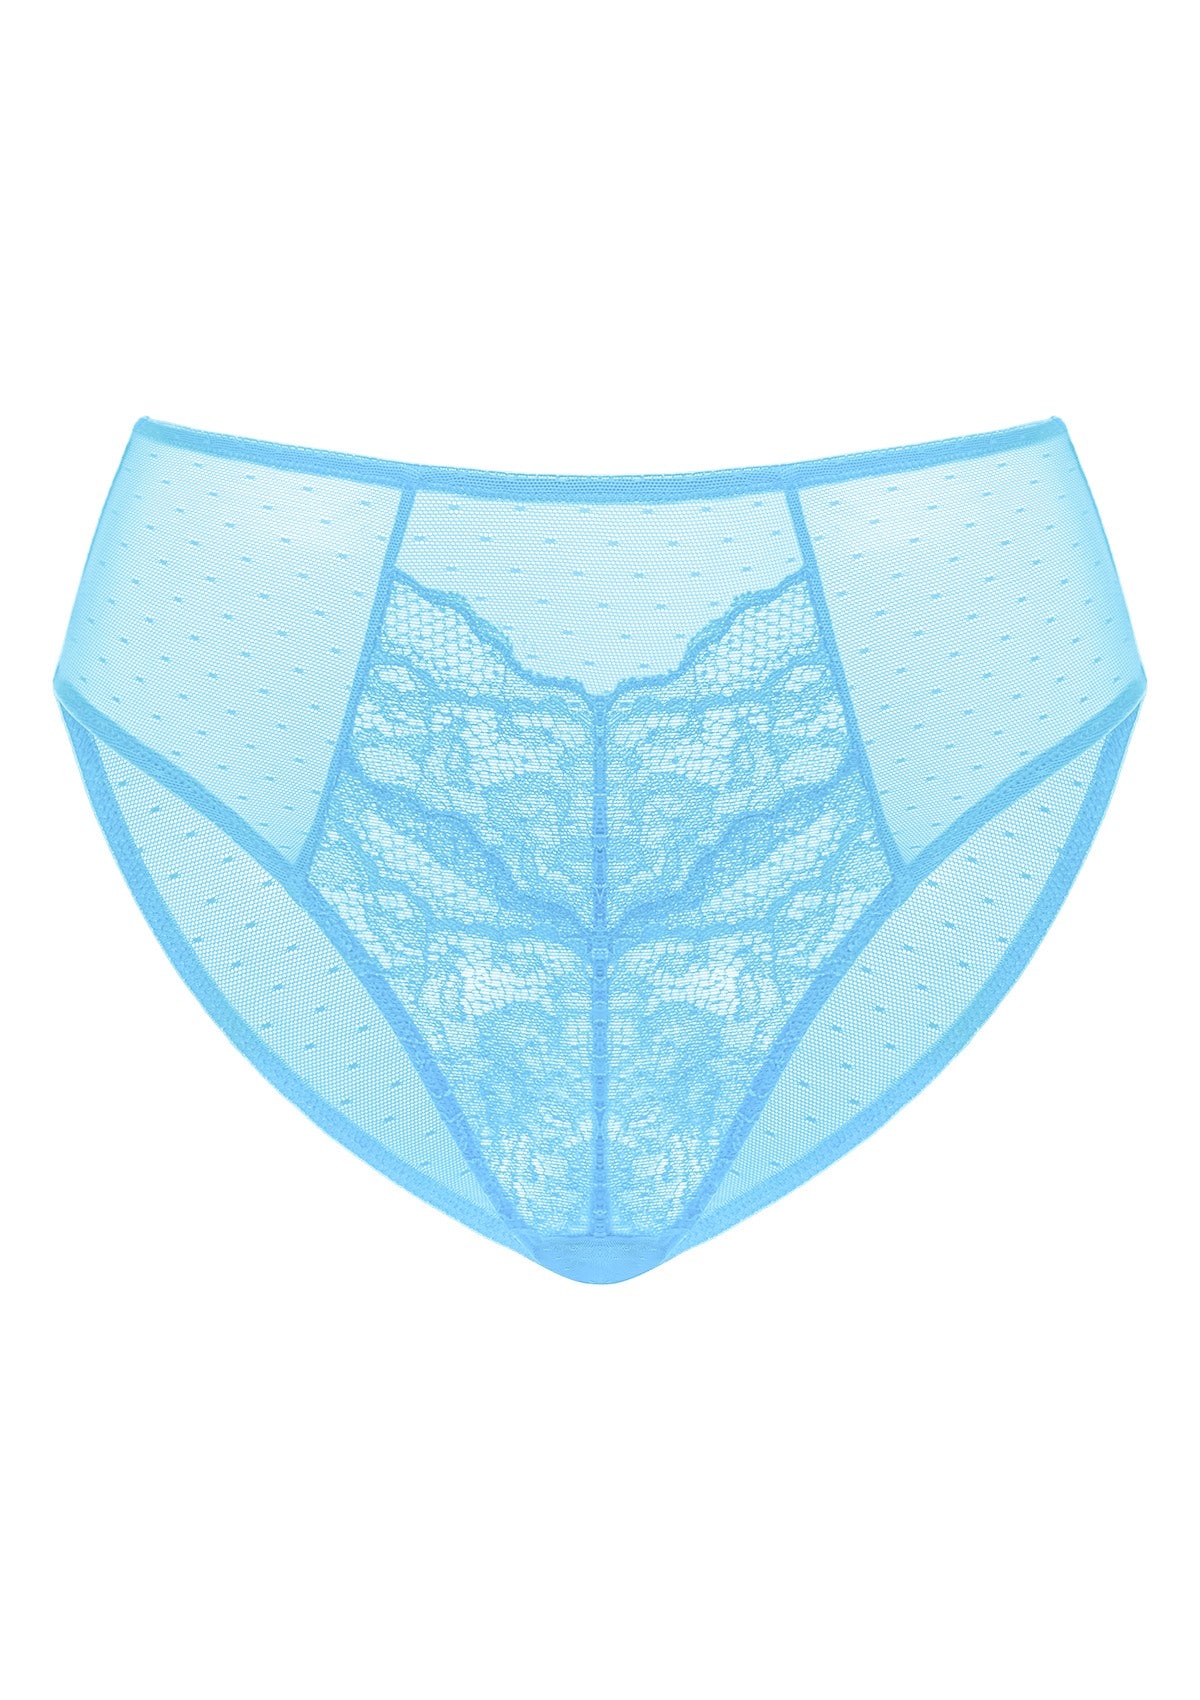 HSIA Enchante High-Rise Floral Lacy Panty-Comfort In Style - M / Capri Blue